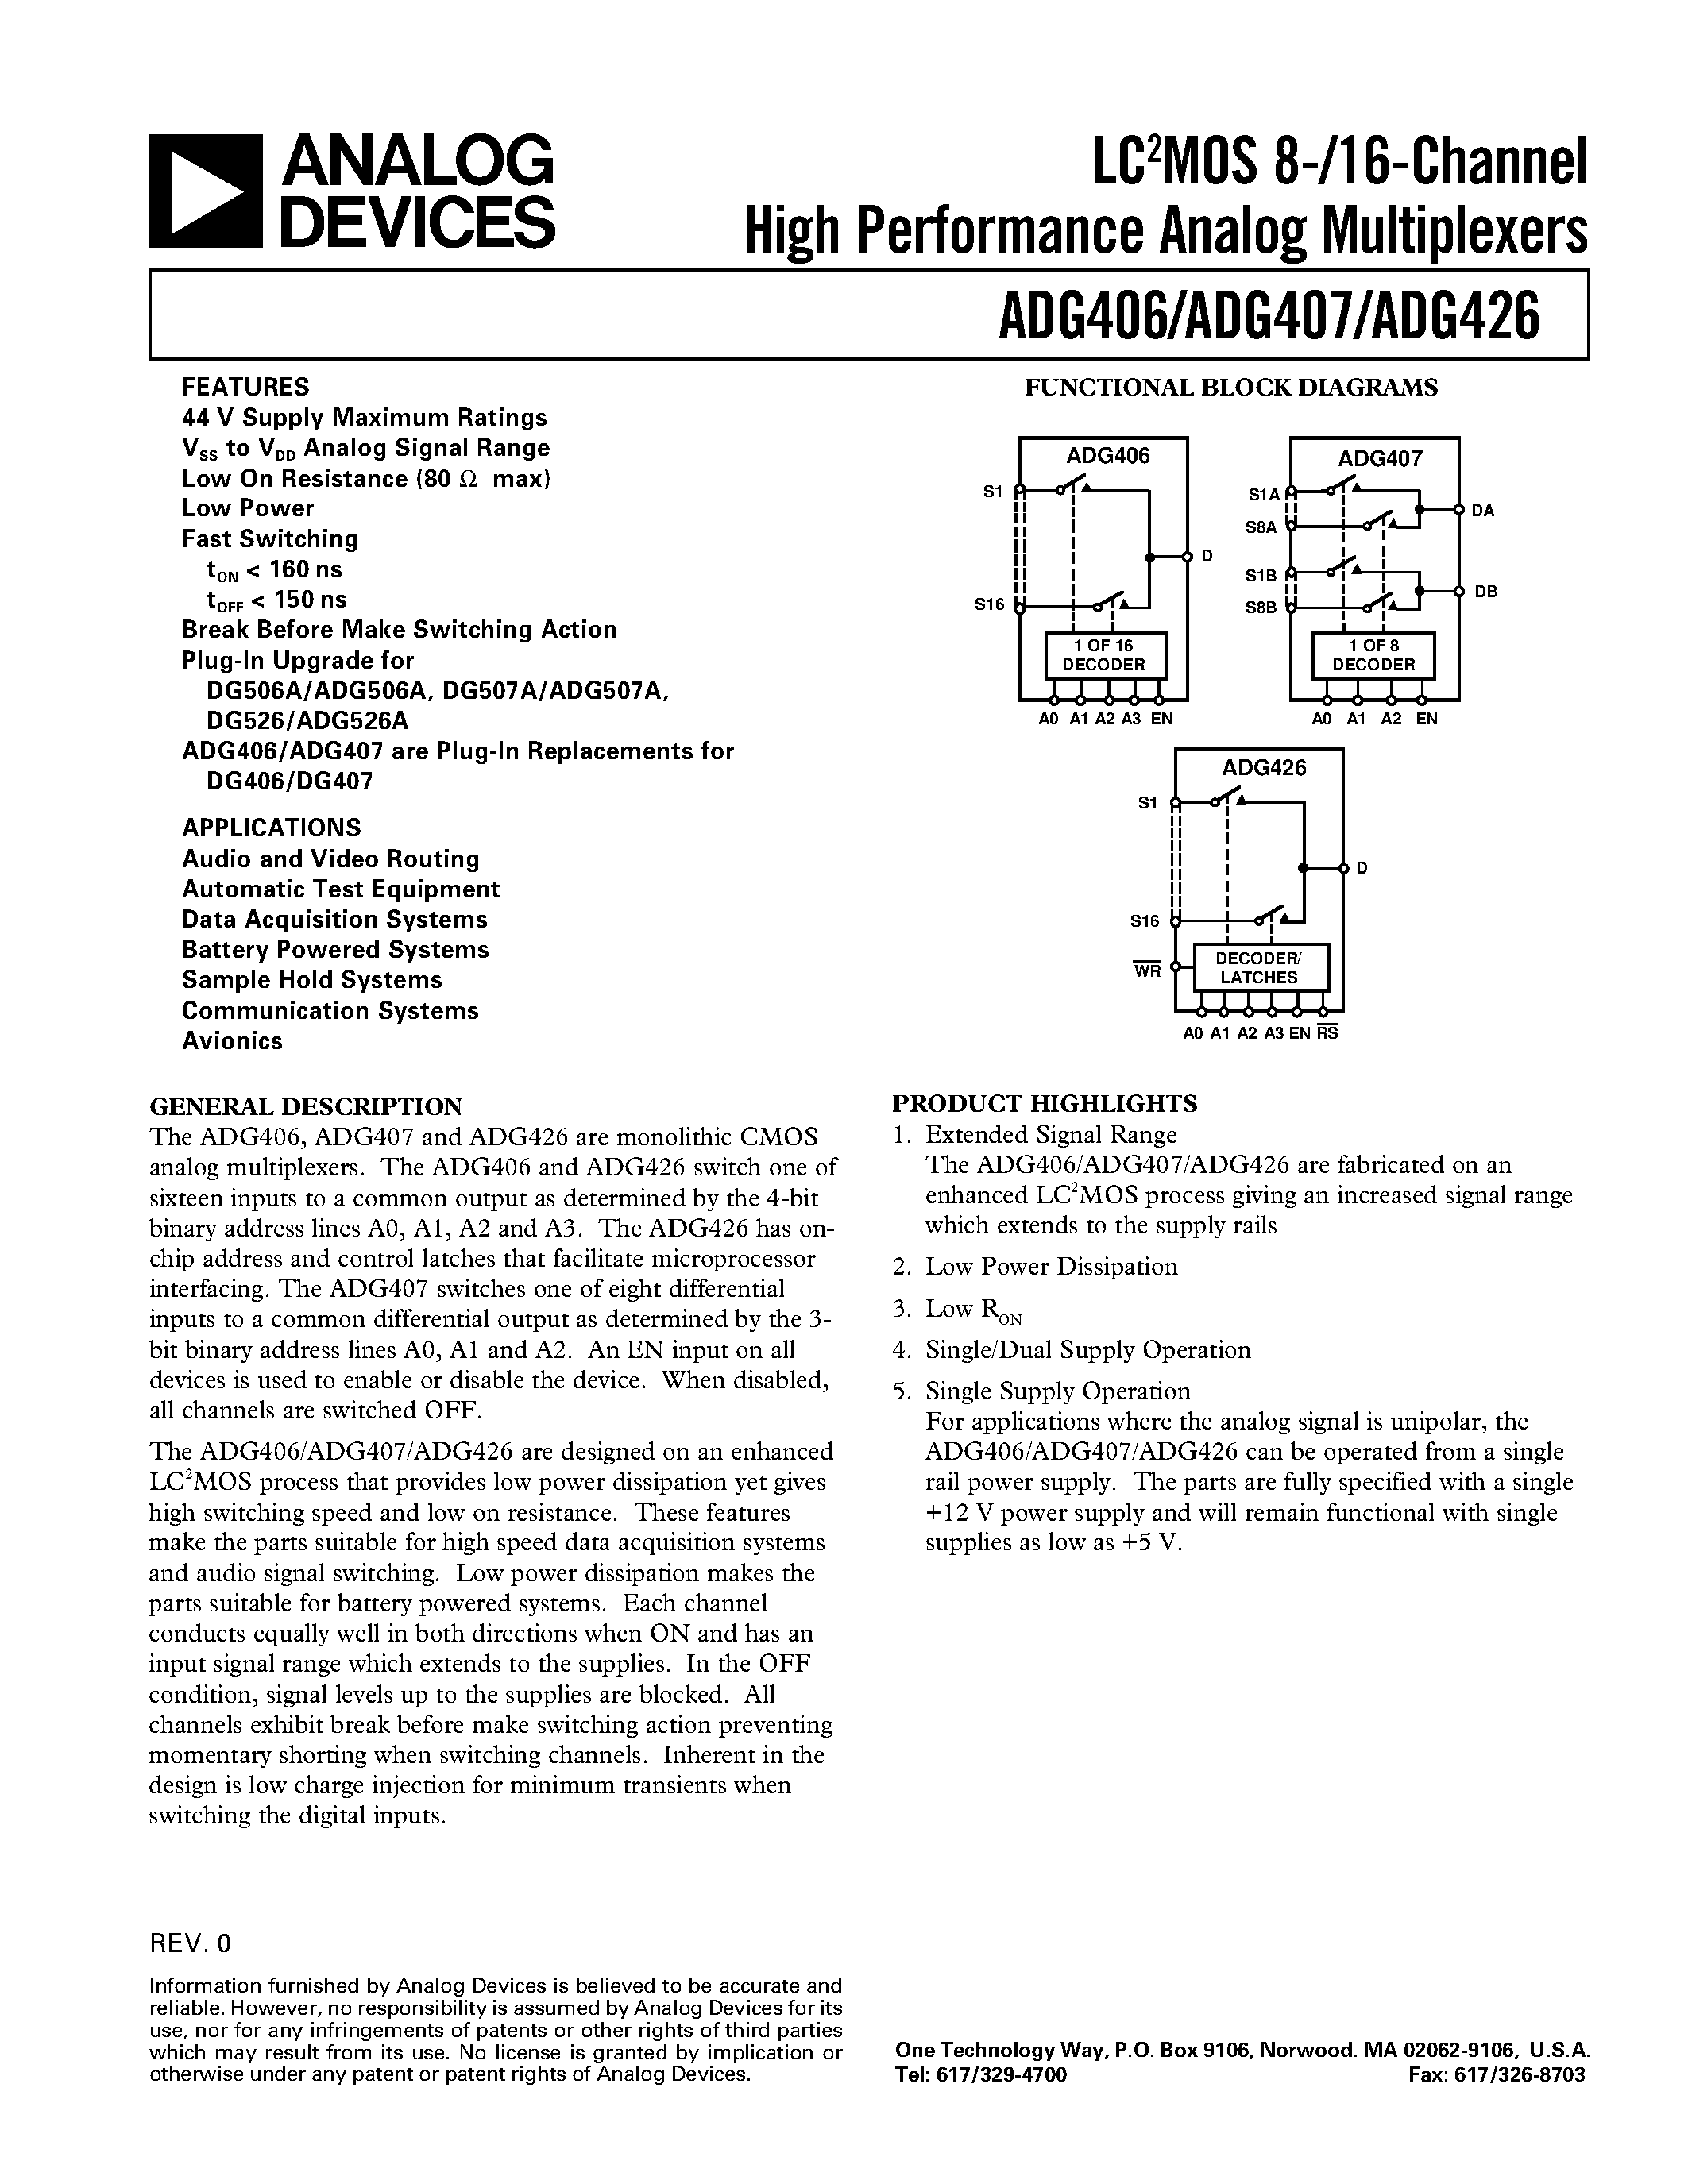 Datasheet ADG407BN - LC2MOS 8-/16-Channel High Performance Analog Multiplexers page 1